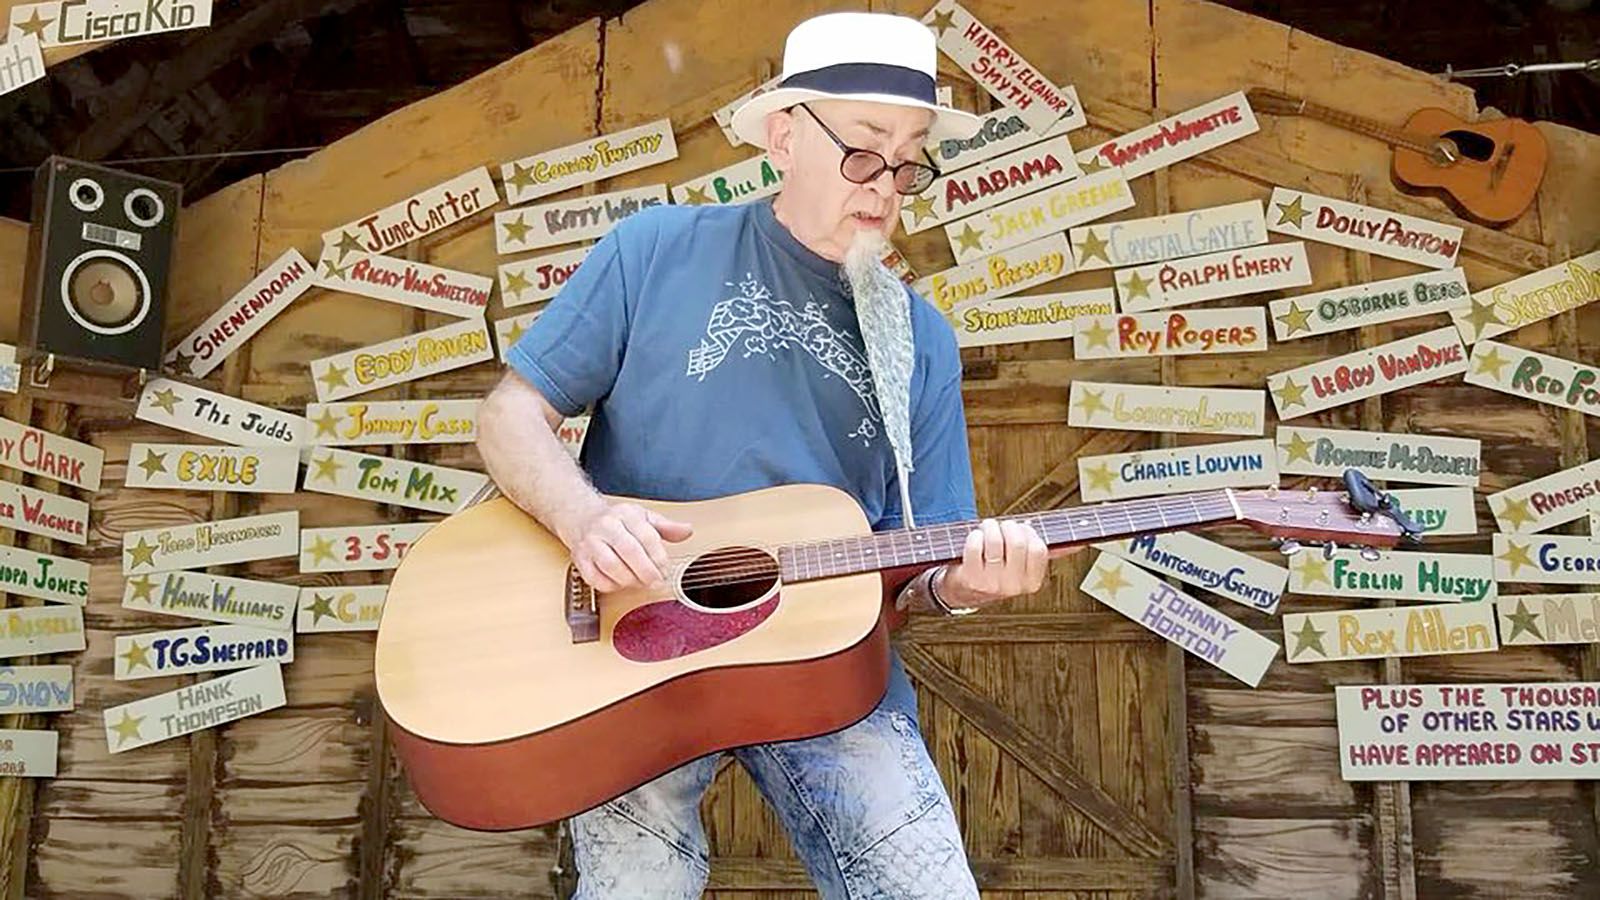 Ted Brown will take the stage both days of this year’s Sum Morz Andy Music Fest when Pop n’ Fresh performs Saturday, Aug. 3, and Sunday, Aug. 4, at Buck Lake Ranch in Angola.